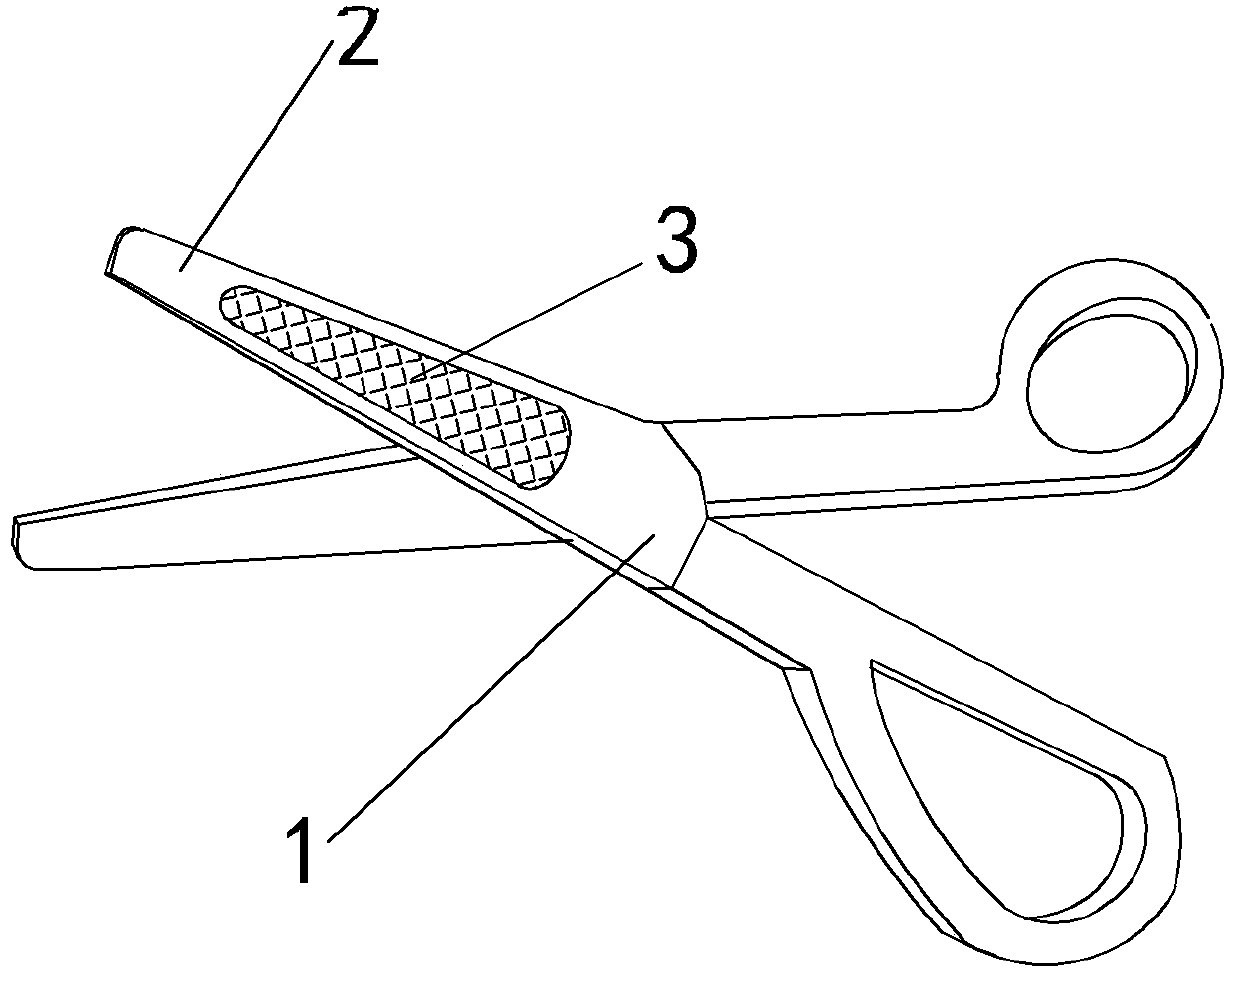 Scissors with nail filing function